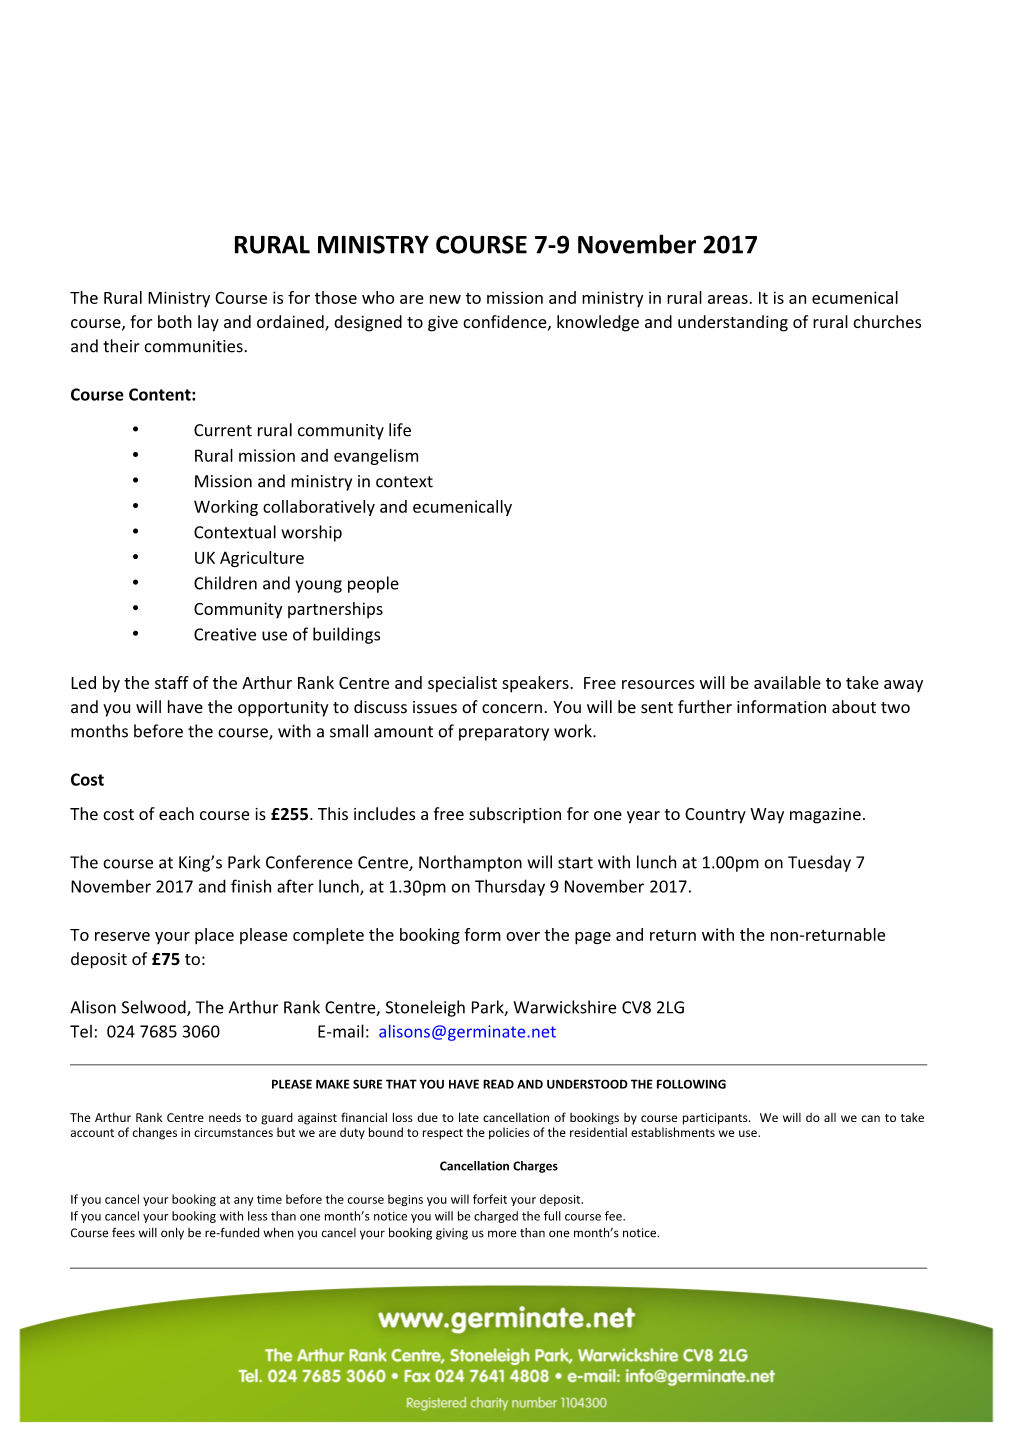 RURAL MINISTRY COURSE 7-9 November 2017